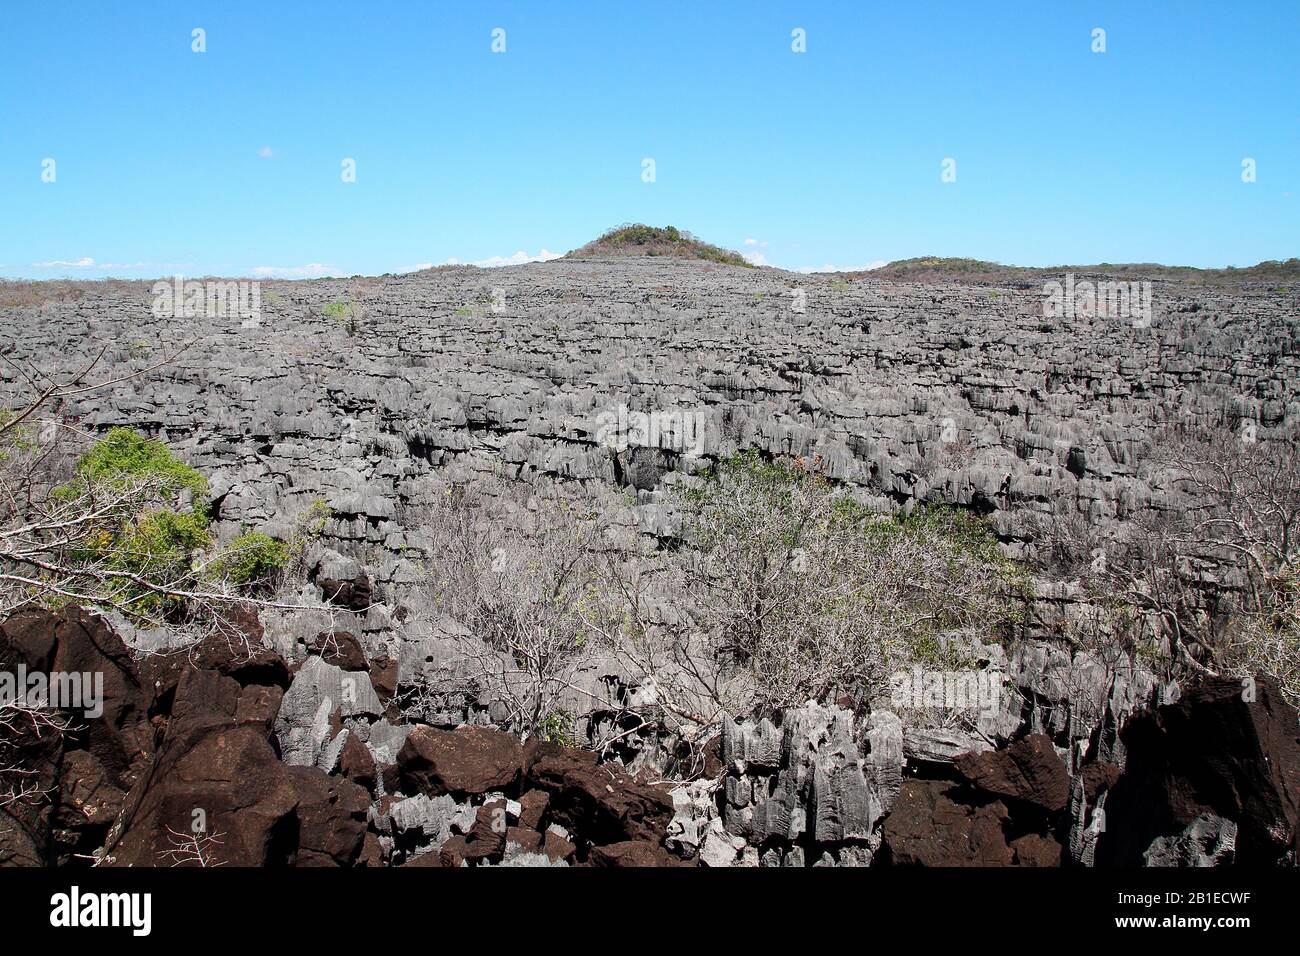 Lava flow in the Tsingy fossil coral reef of Ankarana, 18 220 ha NP over 35 km, North-West Madagascar Stock Photo